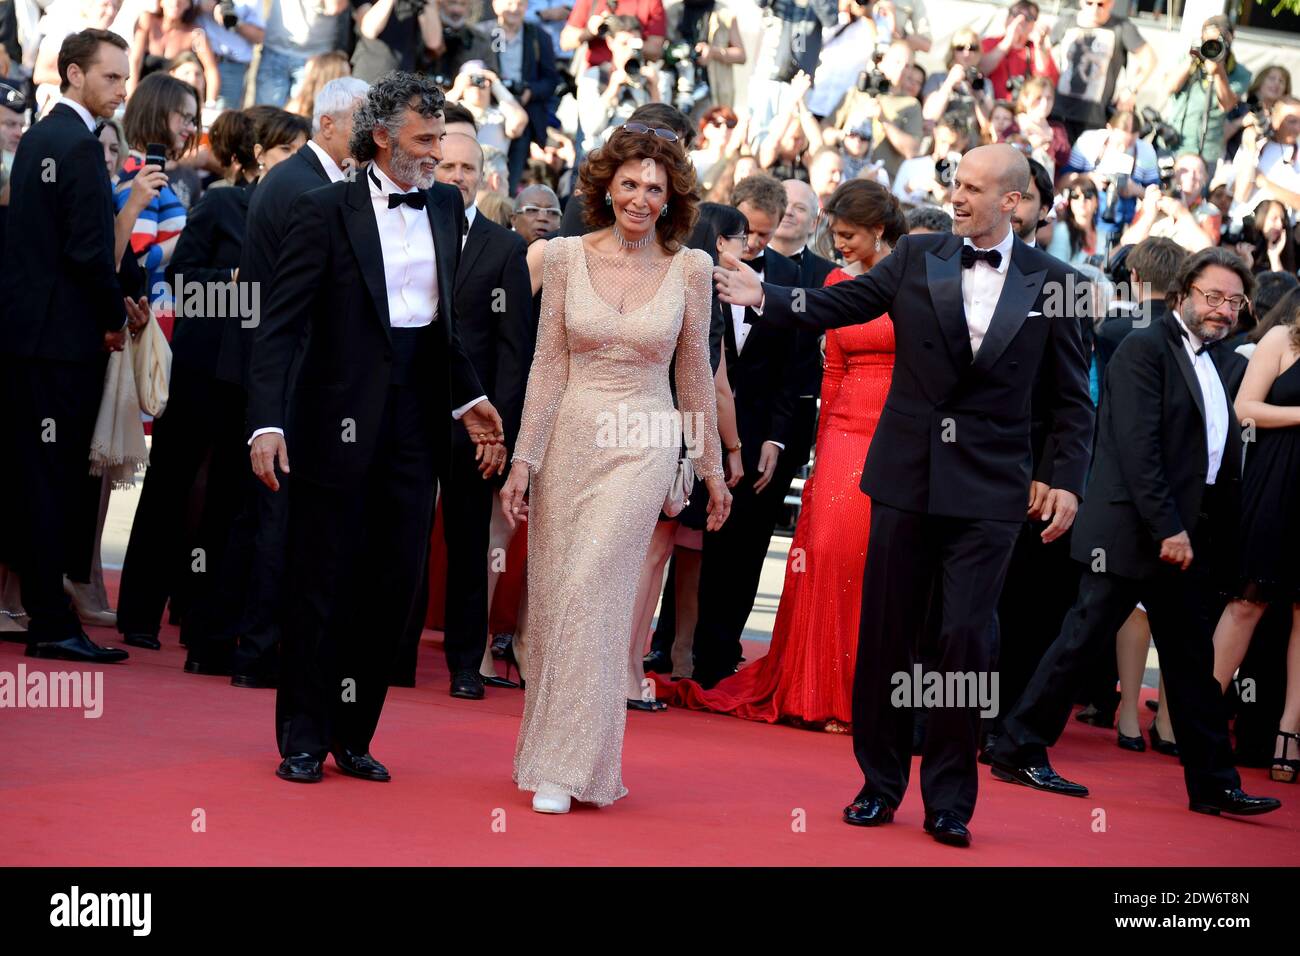 Sophia Loren and her son Edoardo Ponti arriving at the Palais des Festivals  for the screening of the film Deux Jours, Une Nuit as part of the 67th  Cannes Film Festival in